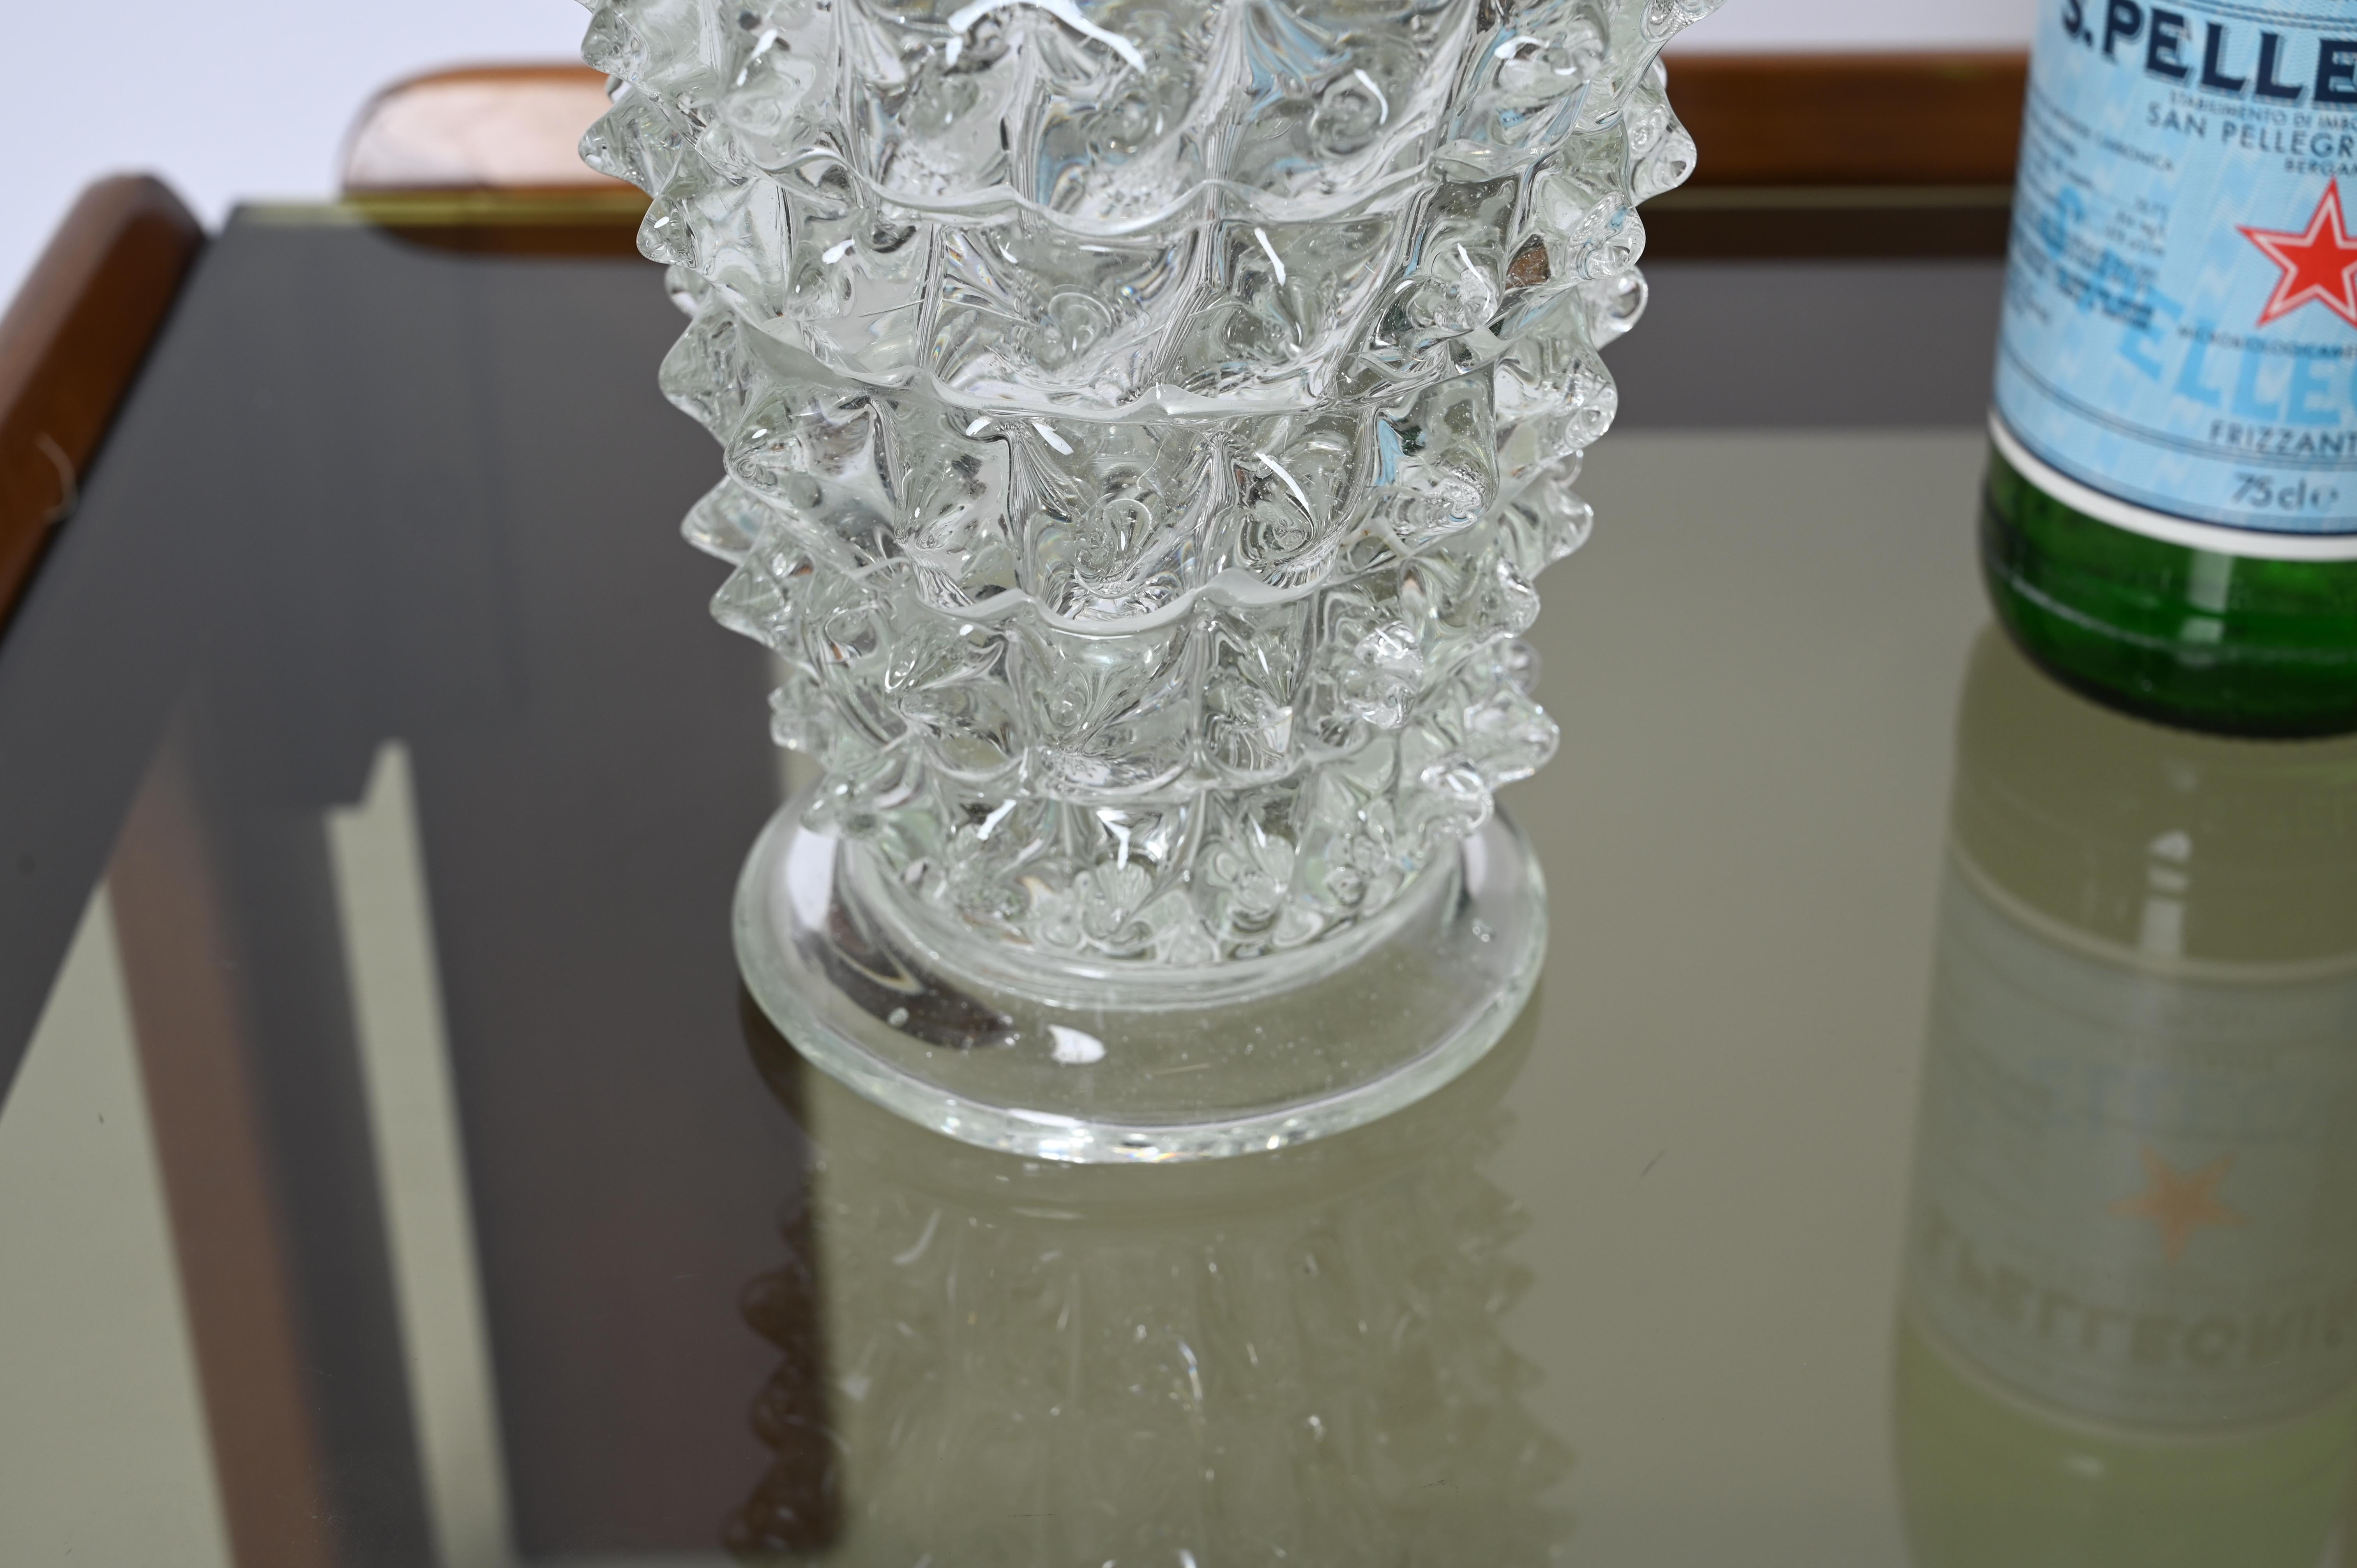 20th Century Rostrato Murano Glass Vase by Ercole Barovier for Barovier & Toso, Italy 1940s